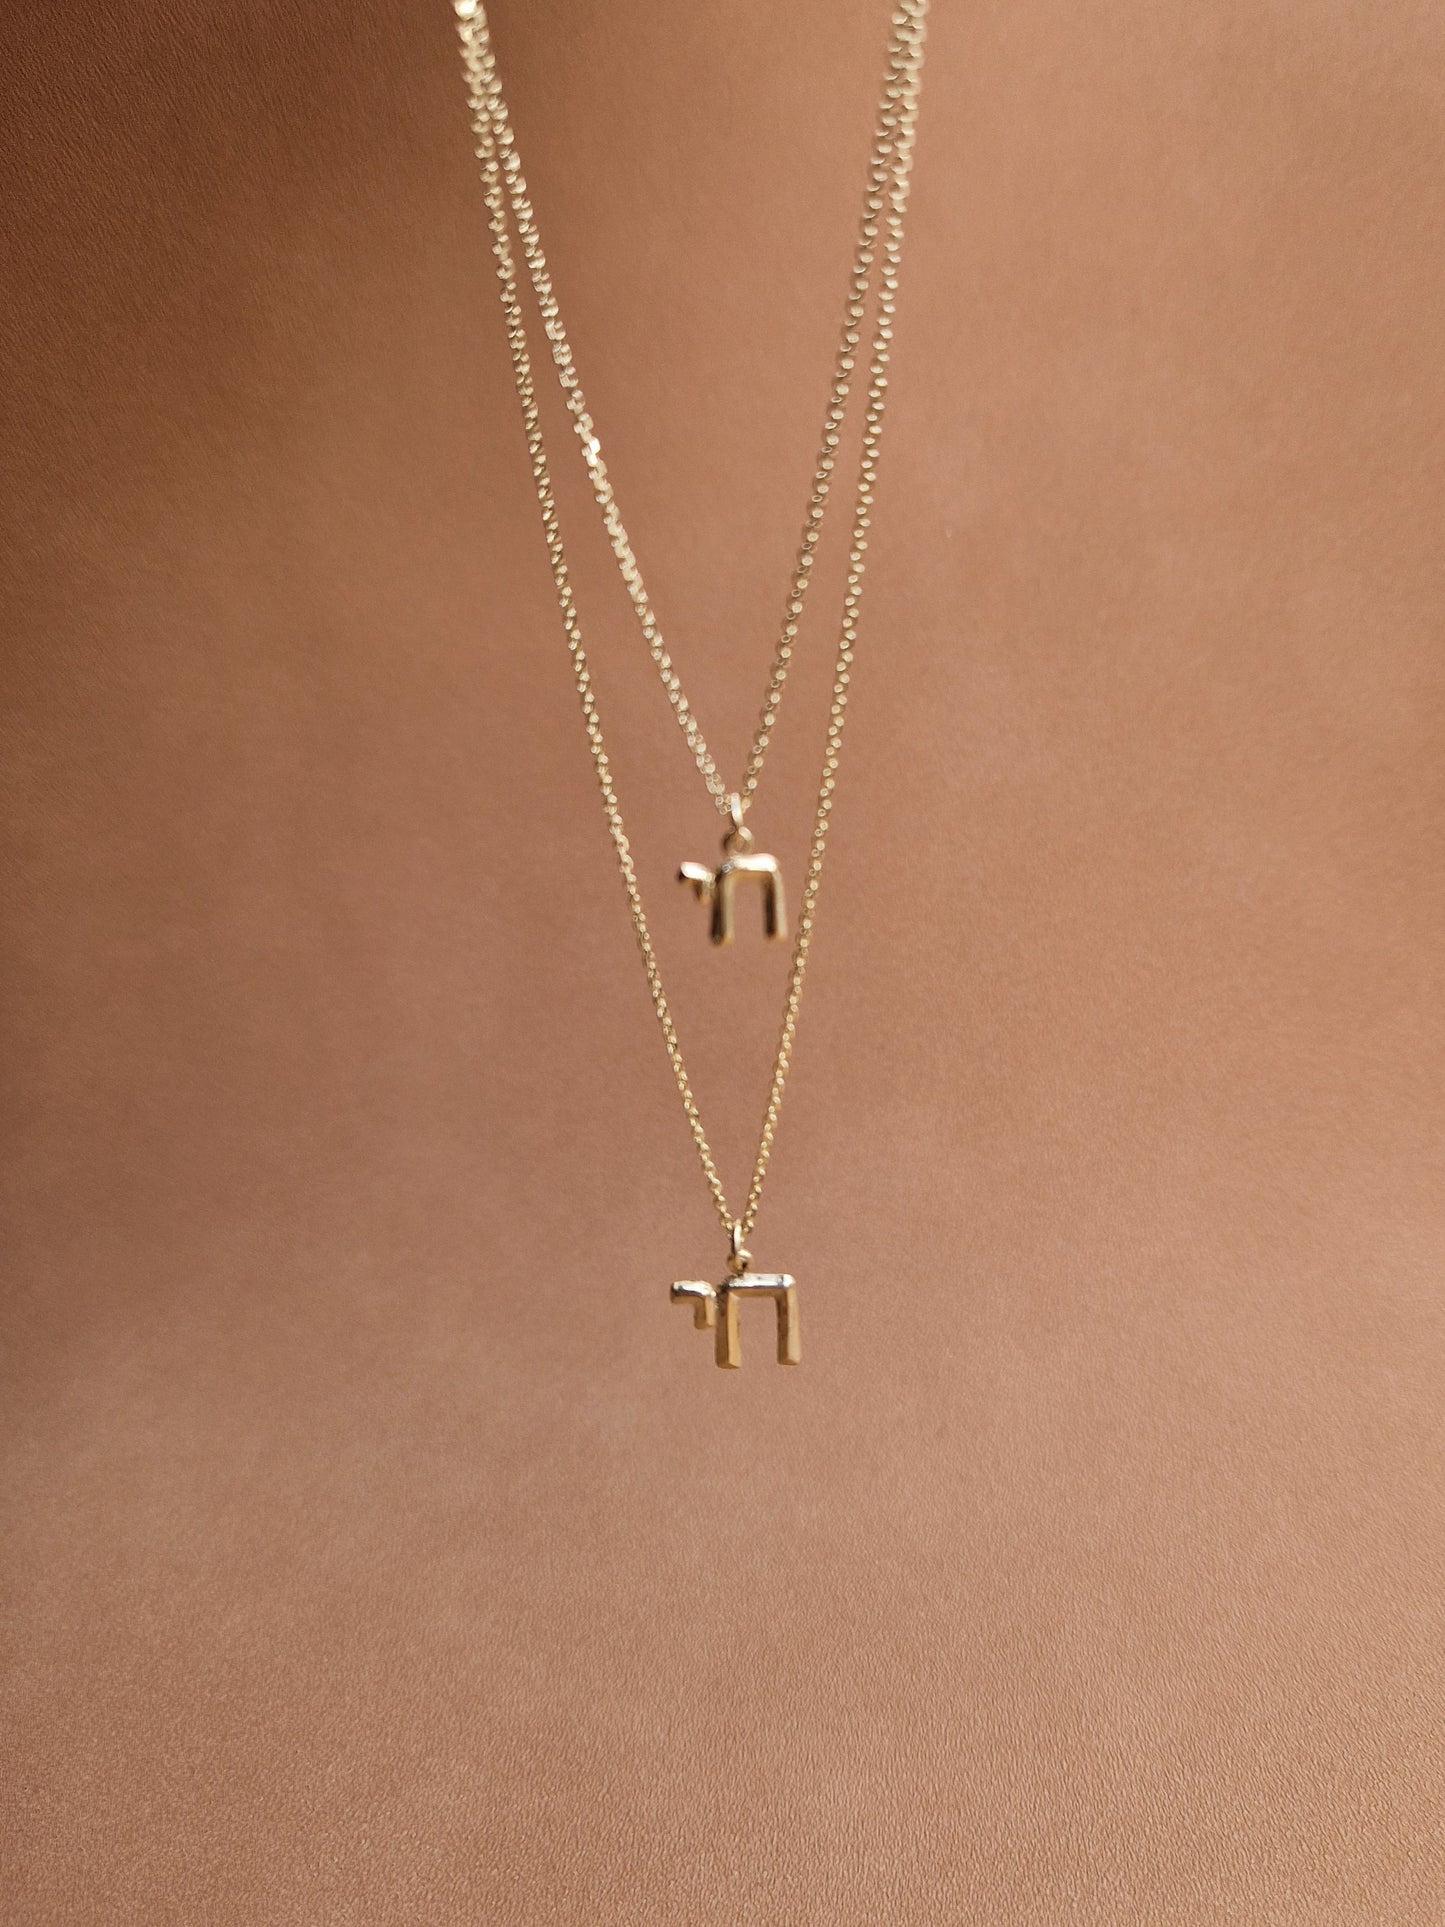 Chai Petit Necklace in 14k